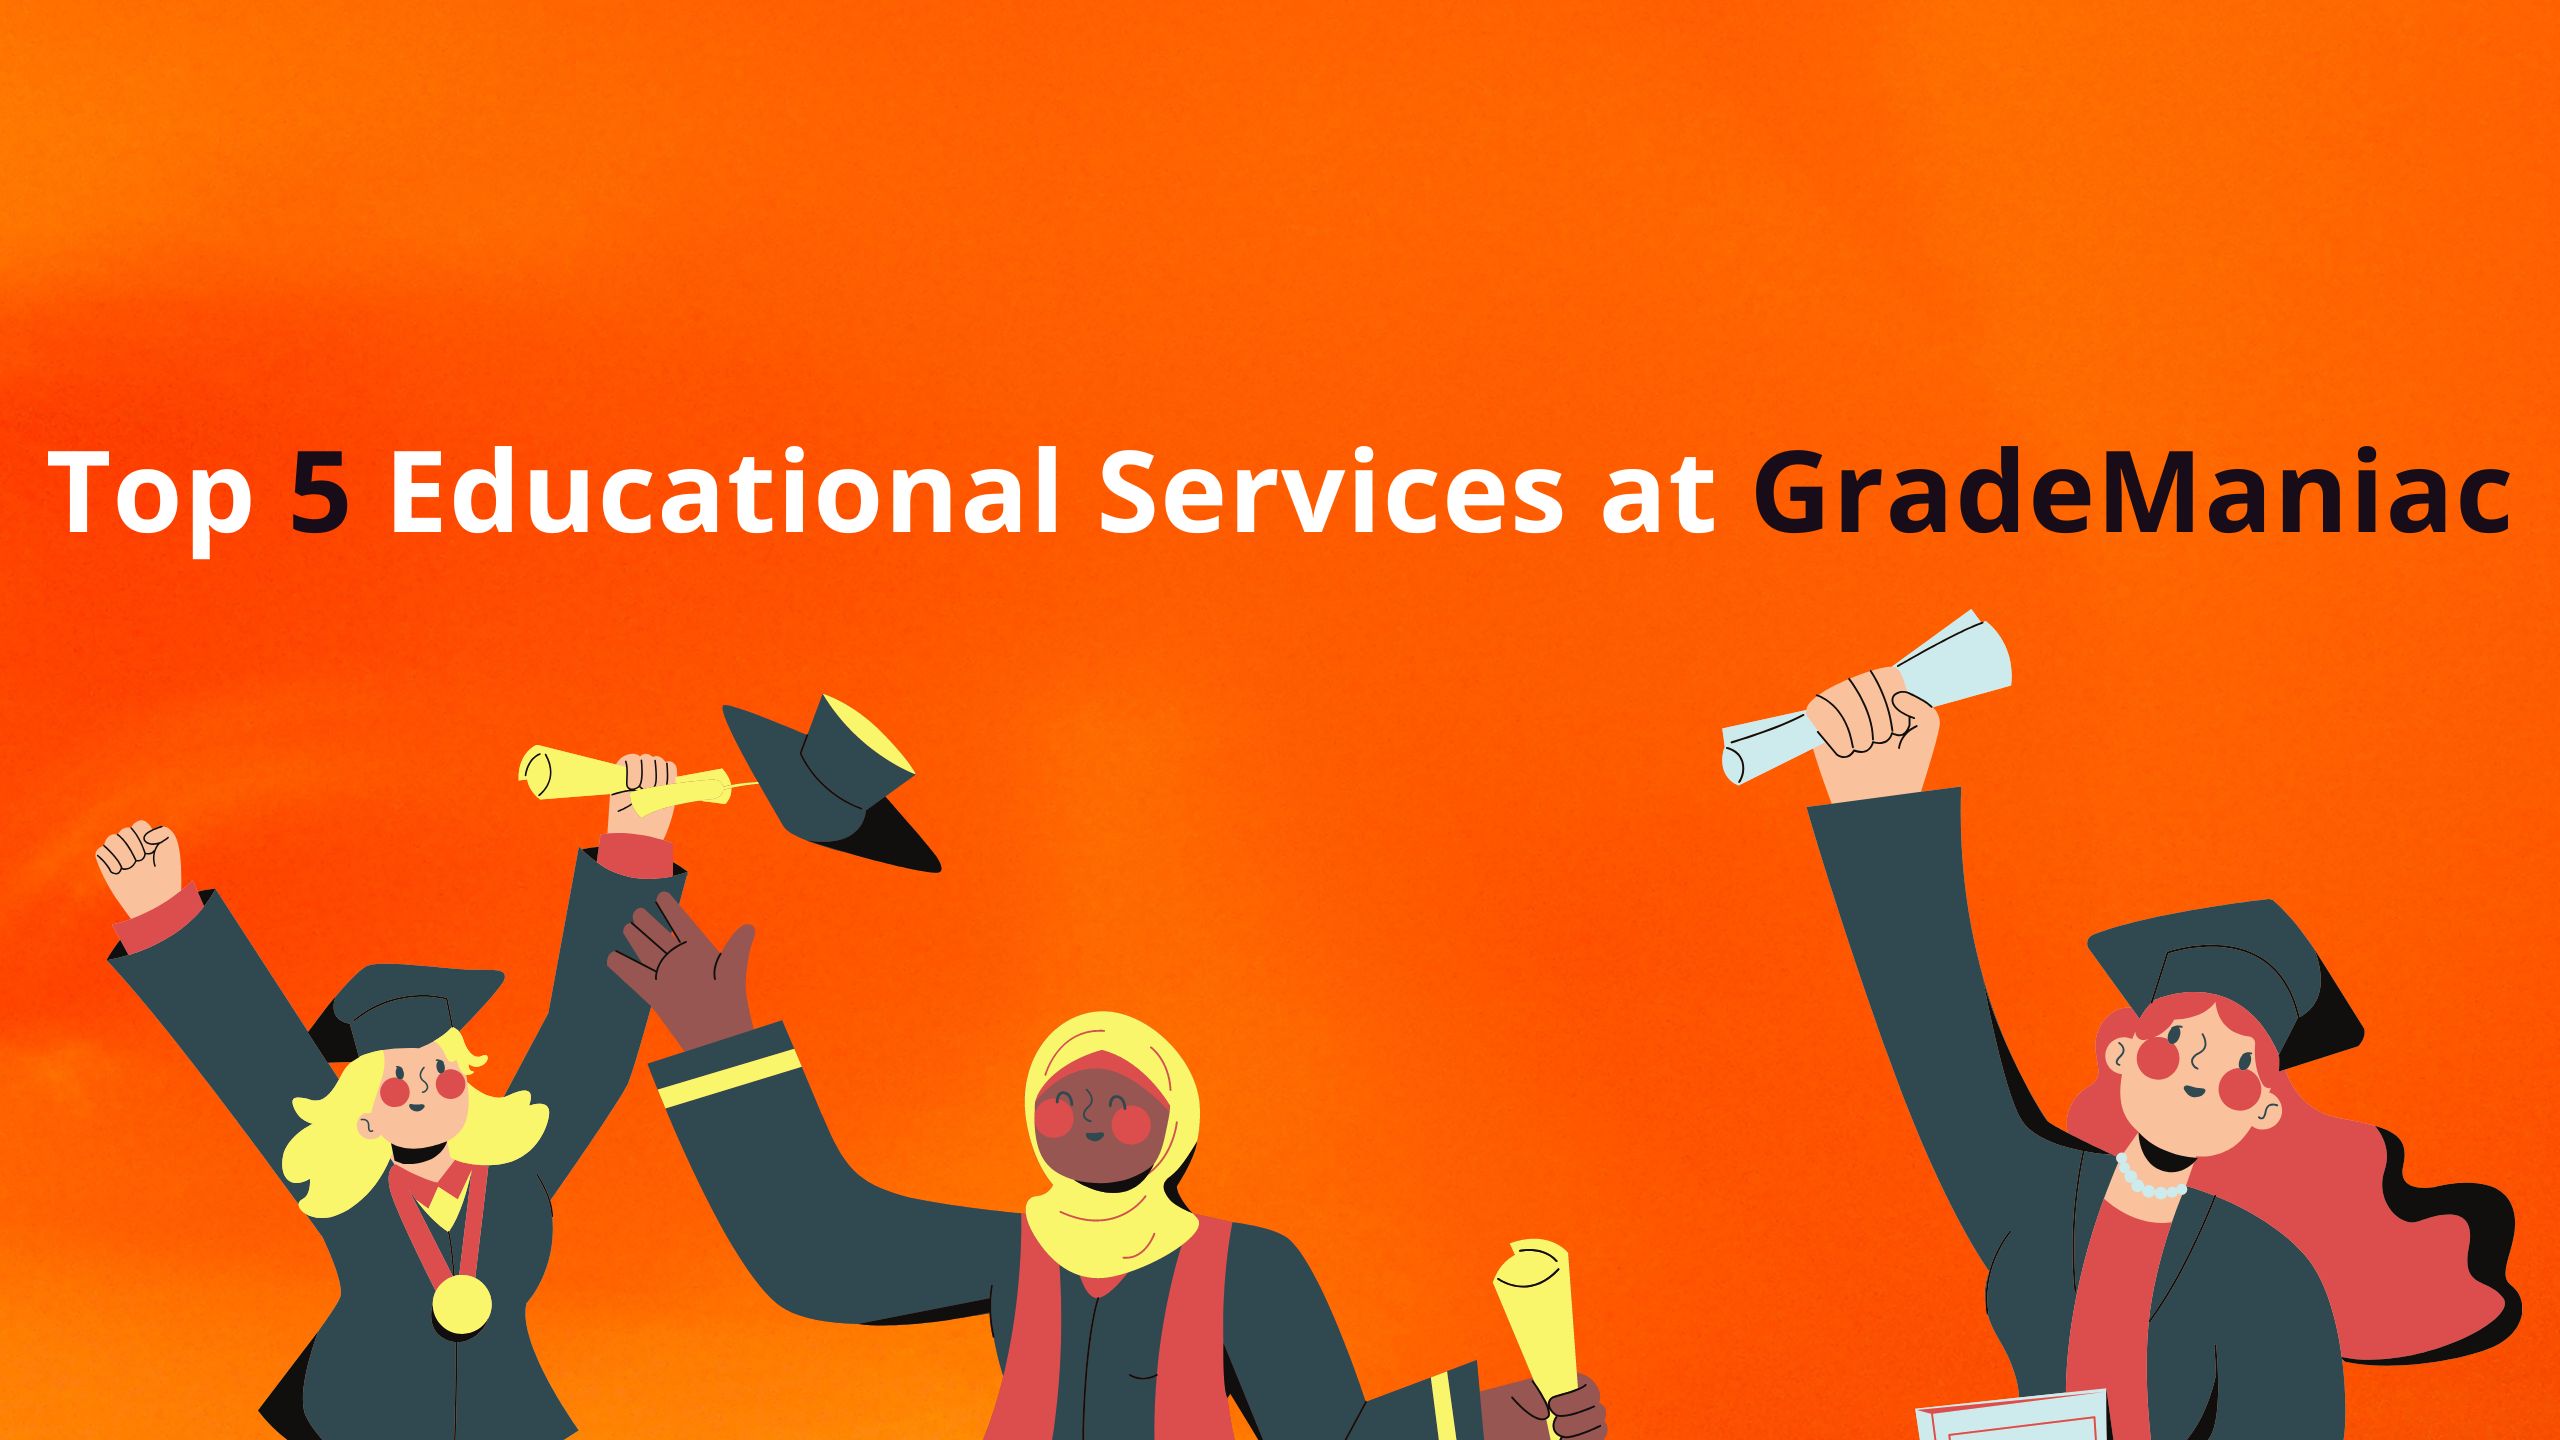 Top 5 Educational Services at GradeManiac